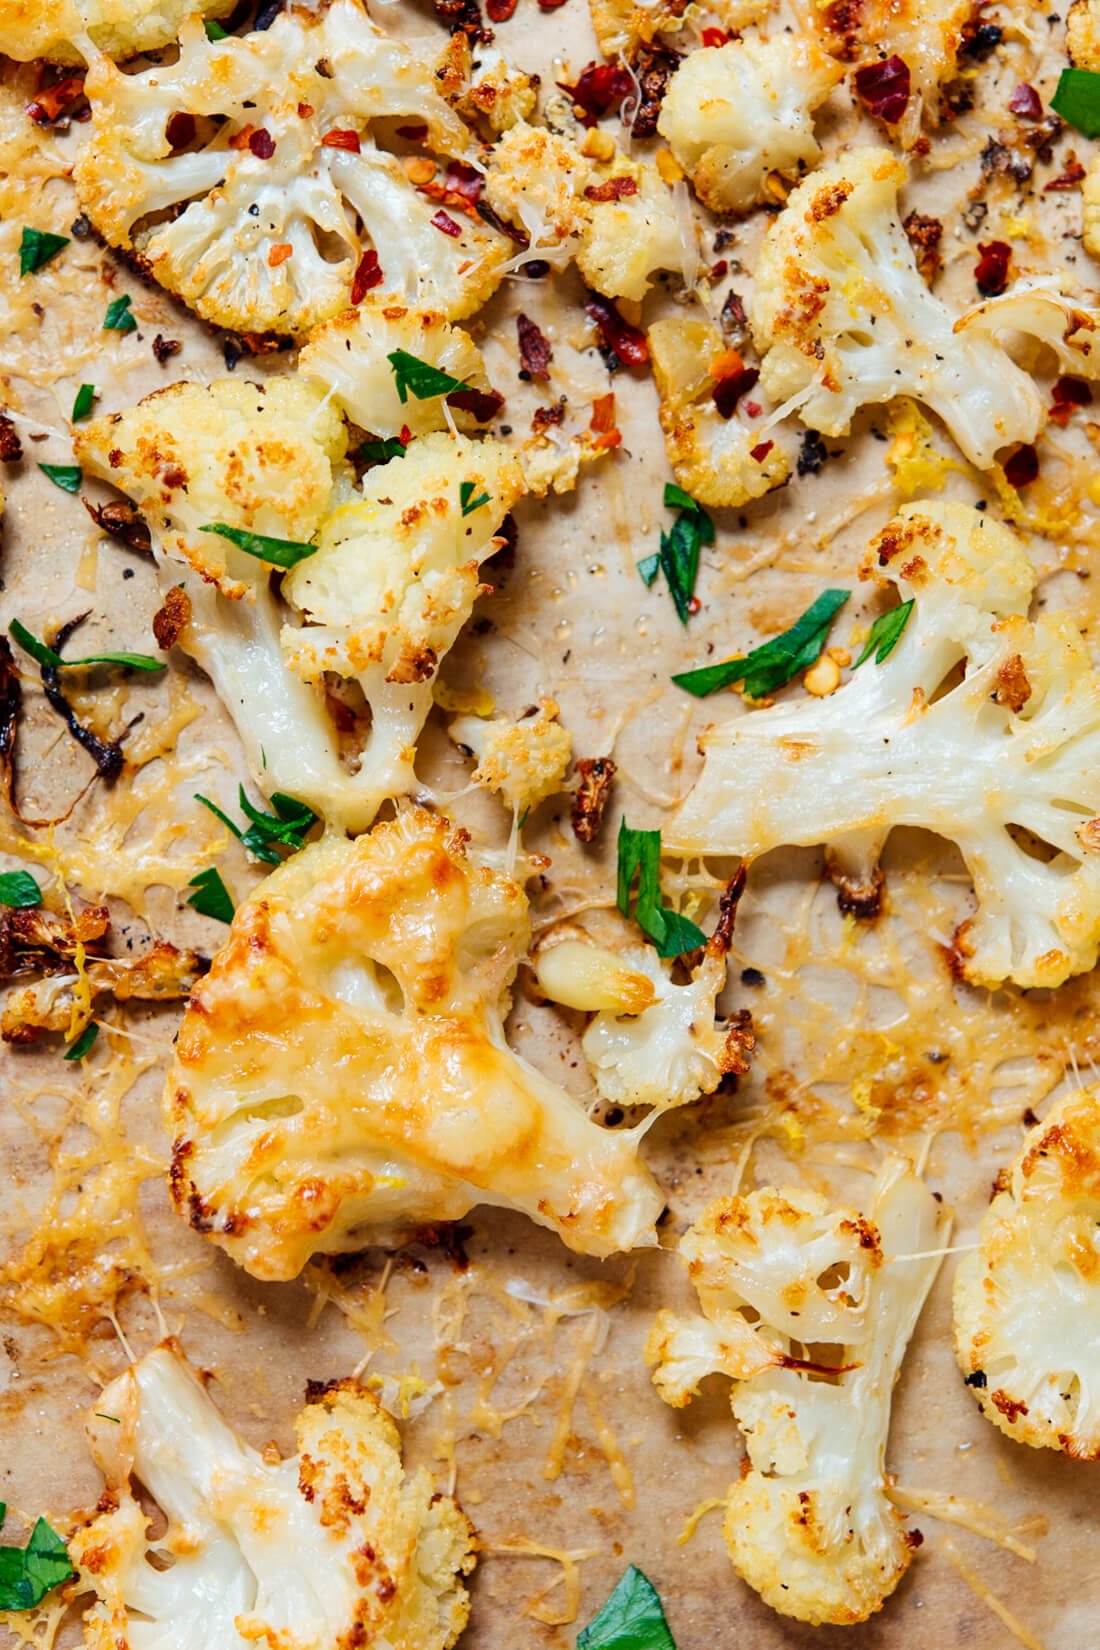 Oven Roasted Cauliflower with Tahini Sauce All the Healthy Things